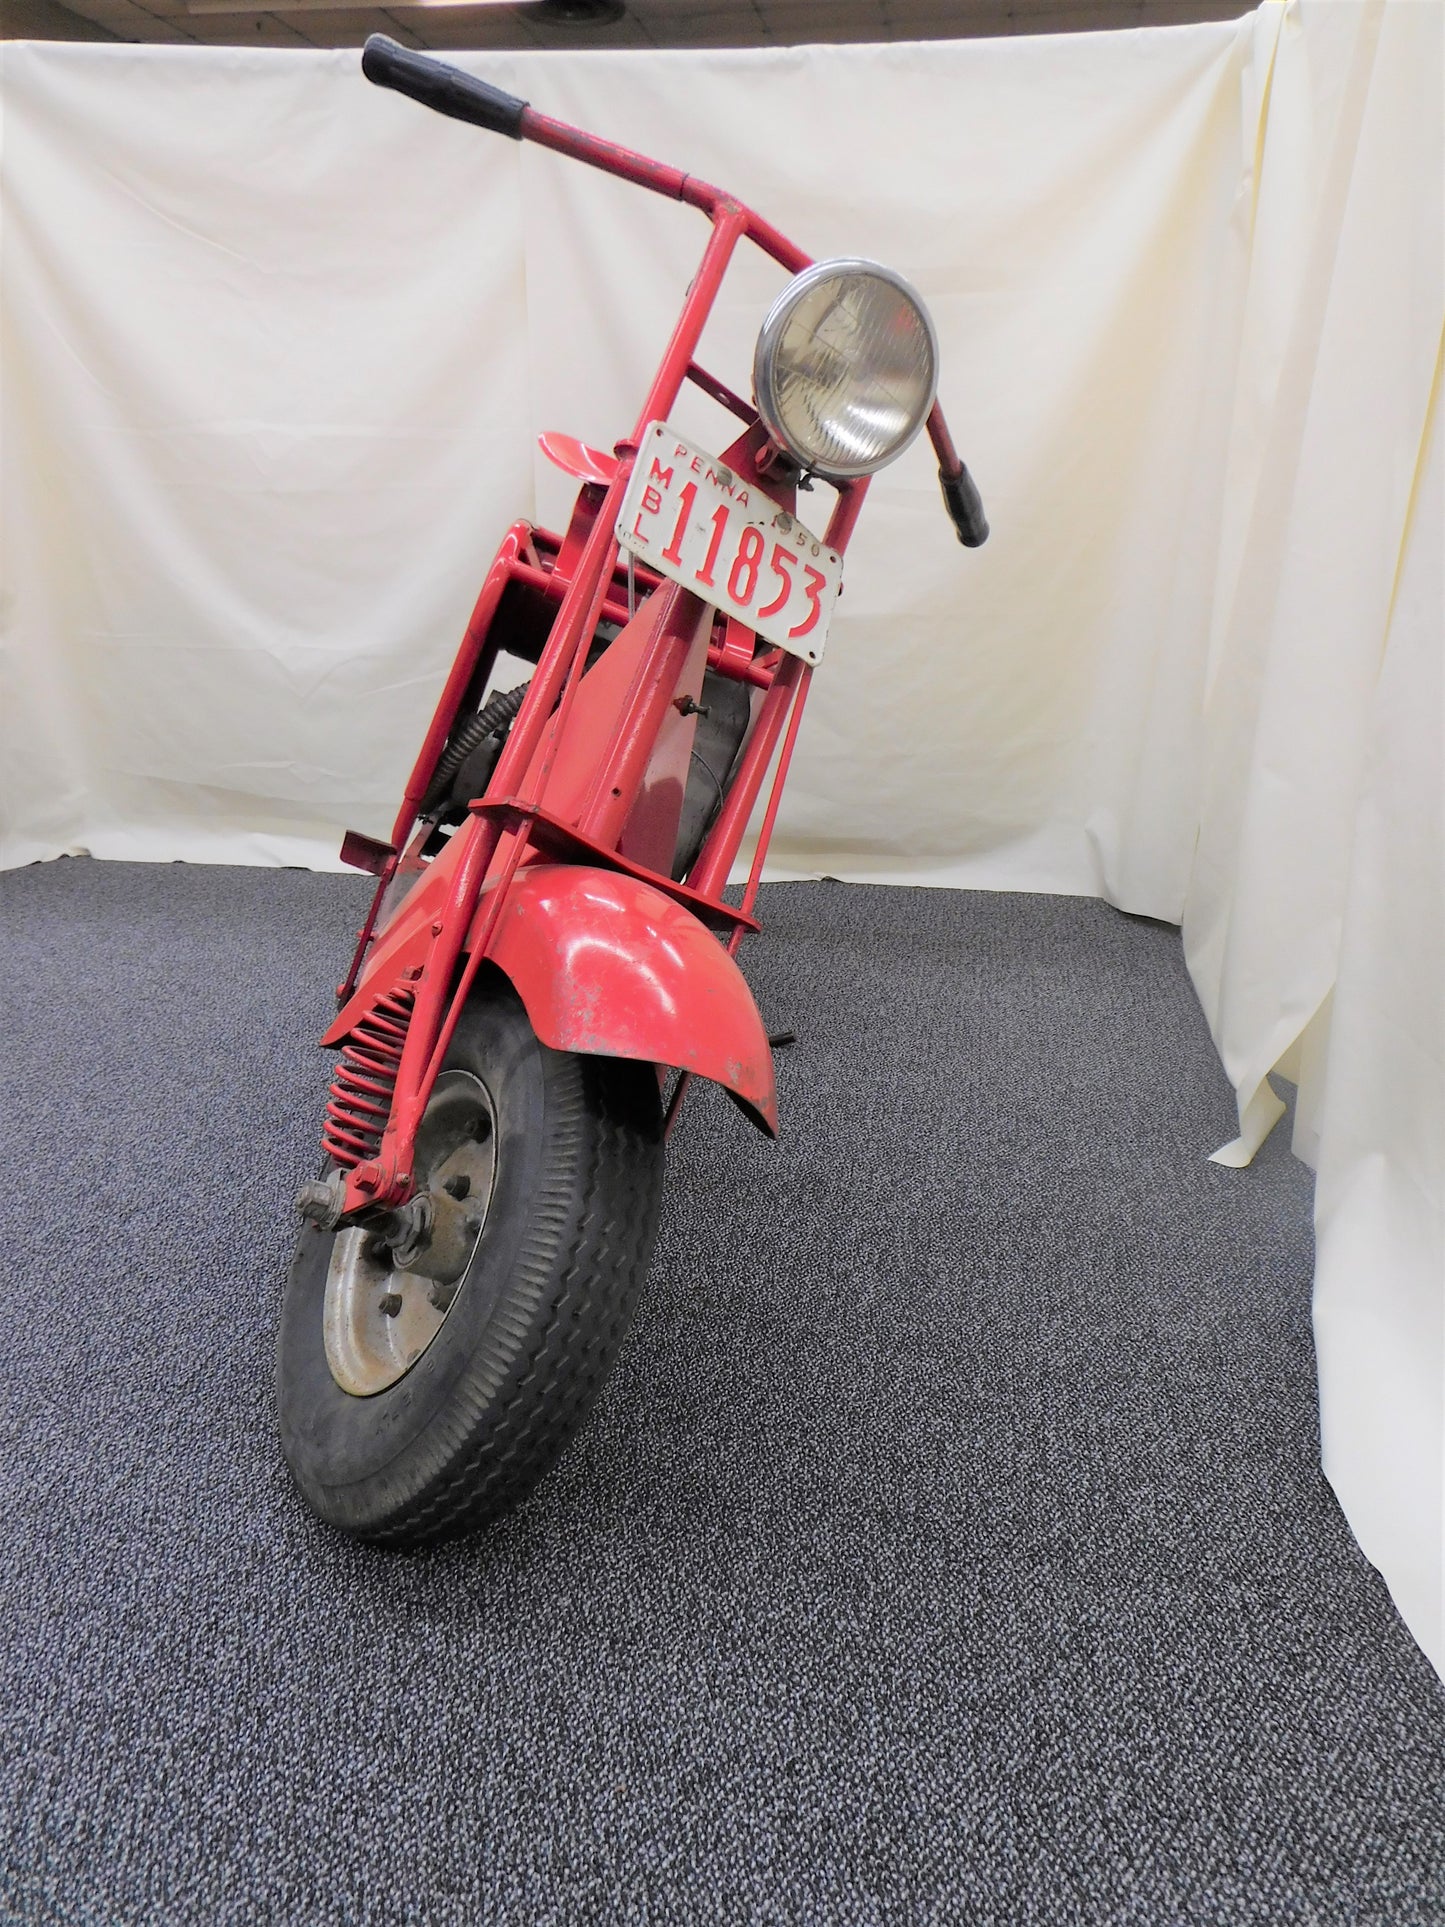 1952 Allstate Scooter